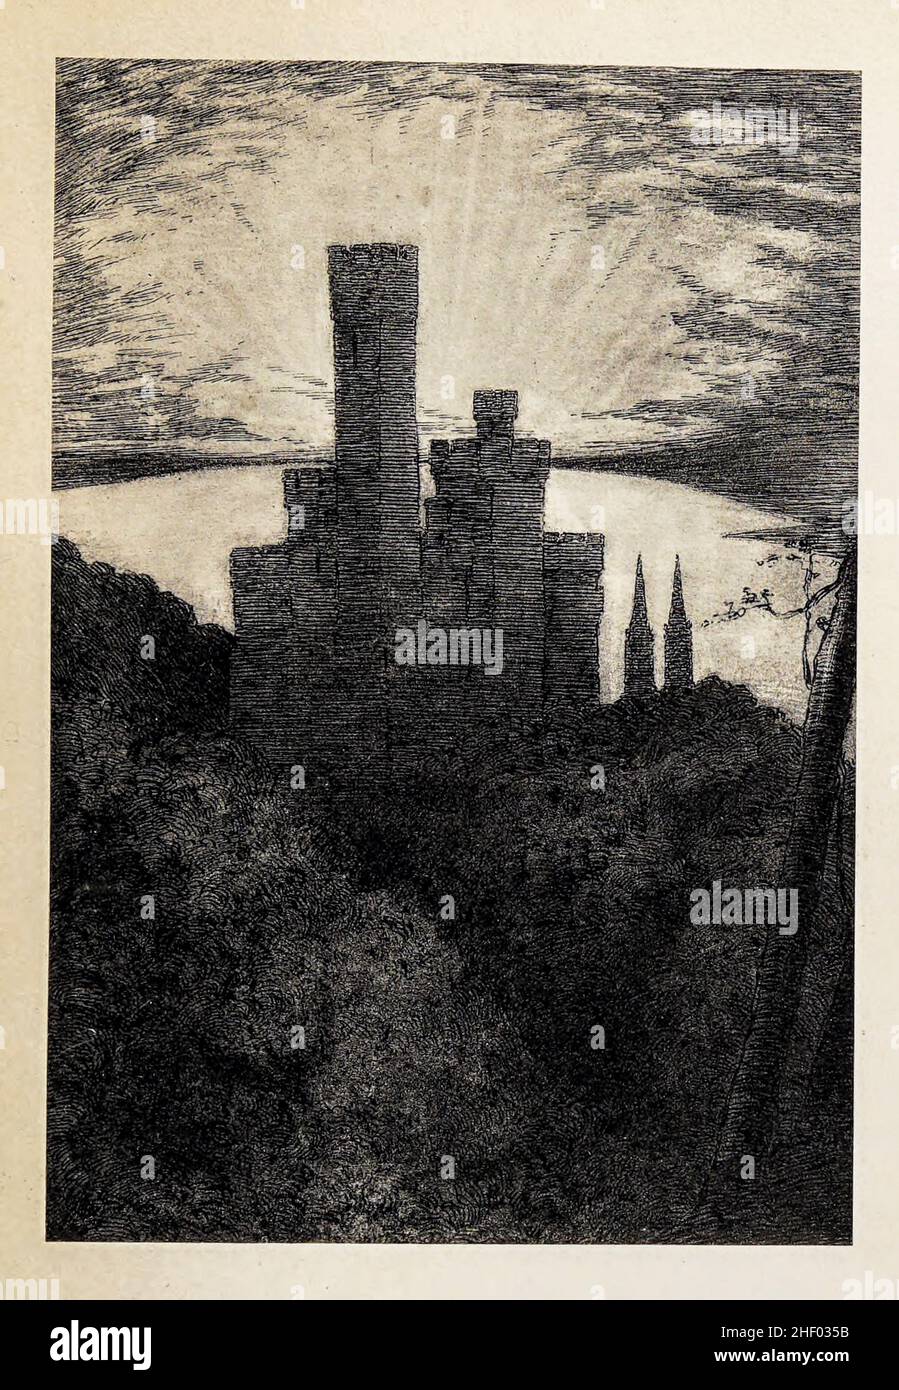 STOLZENFELS by LOUIS WEIRTER, R.B.A. from Stolzenfels: The Alchemist in the book ' Hero tales & legends of the Rhine ' by Lewis Spence, published London : G.G. Harrap 1915 Stock Photo